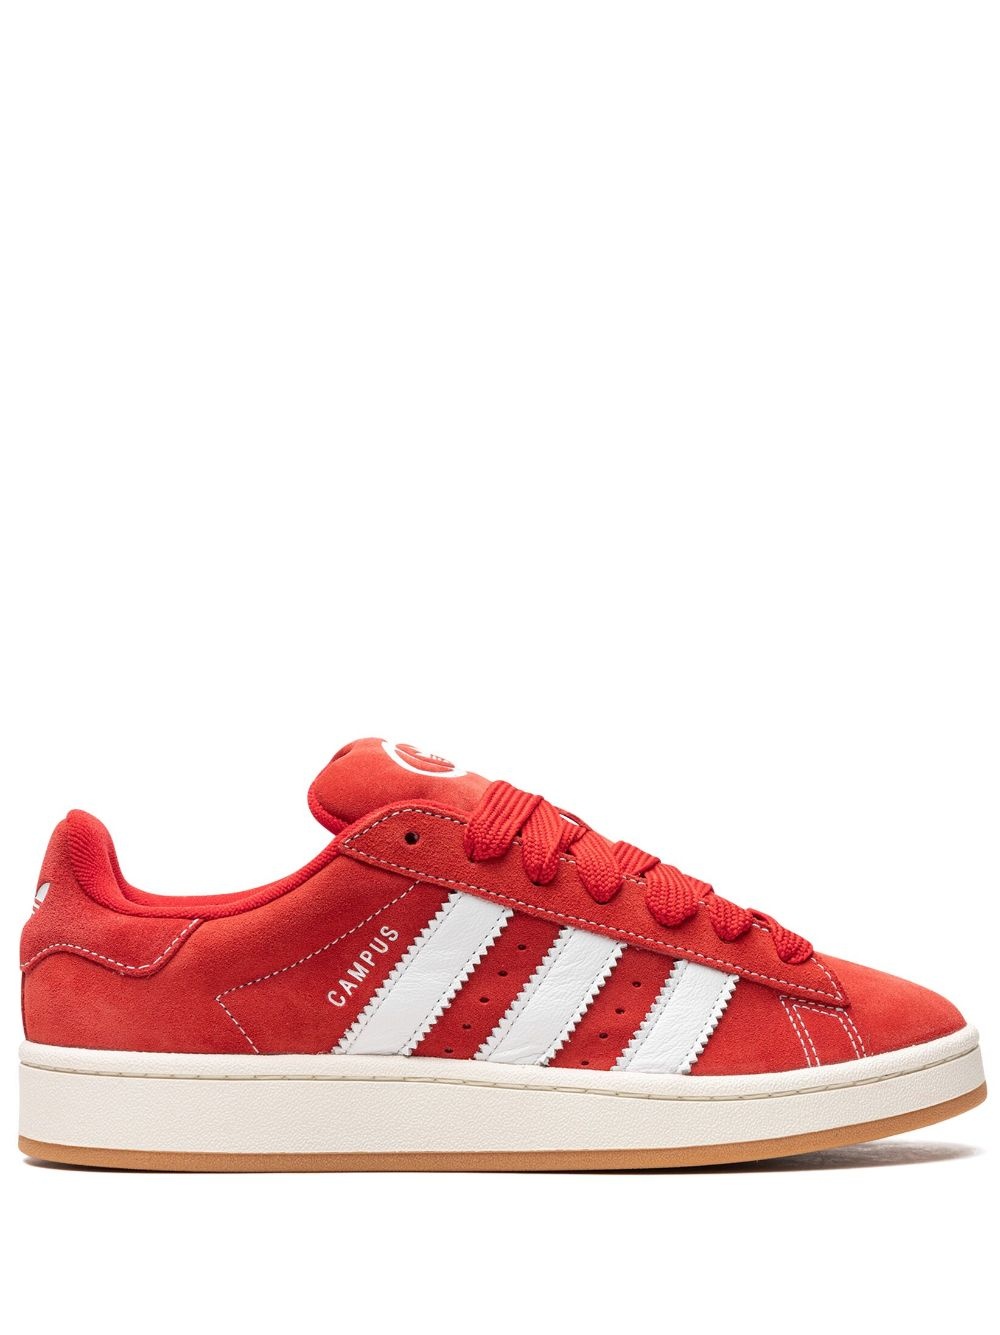 Campus 00s "Better Scarlet/Cloud White" sneakers - 1